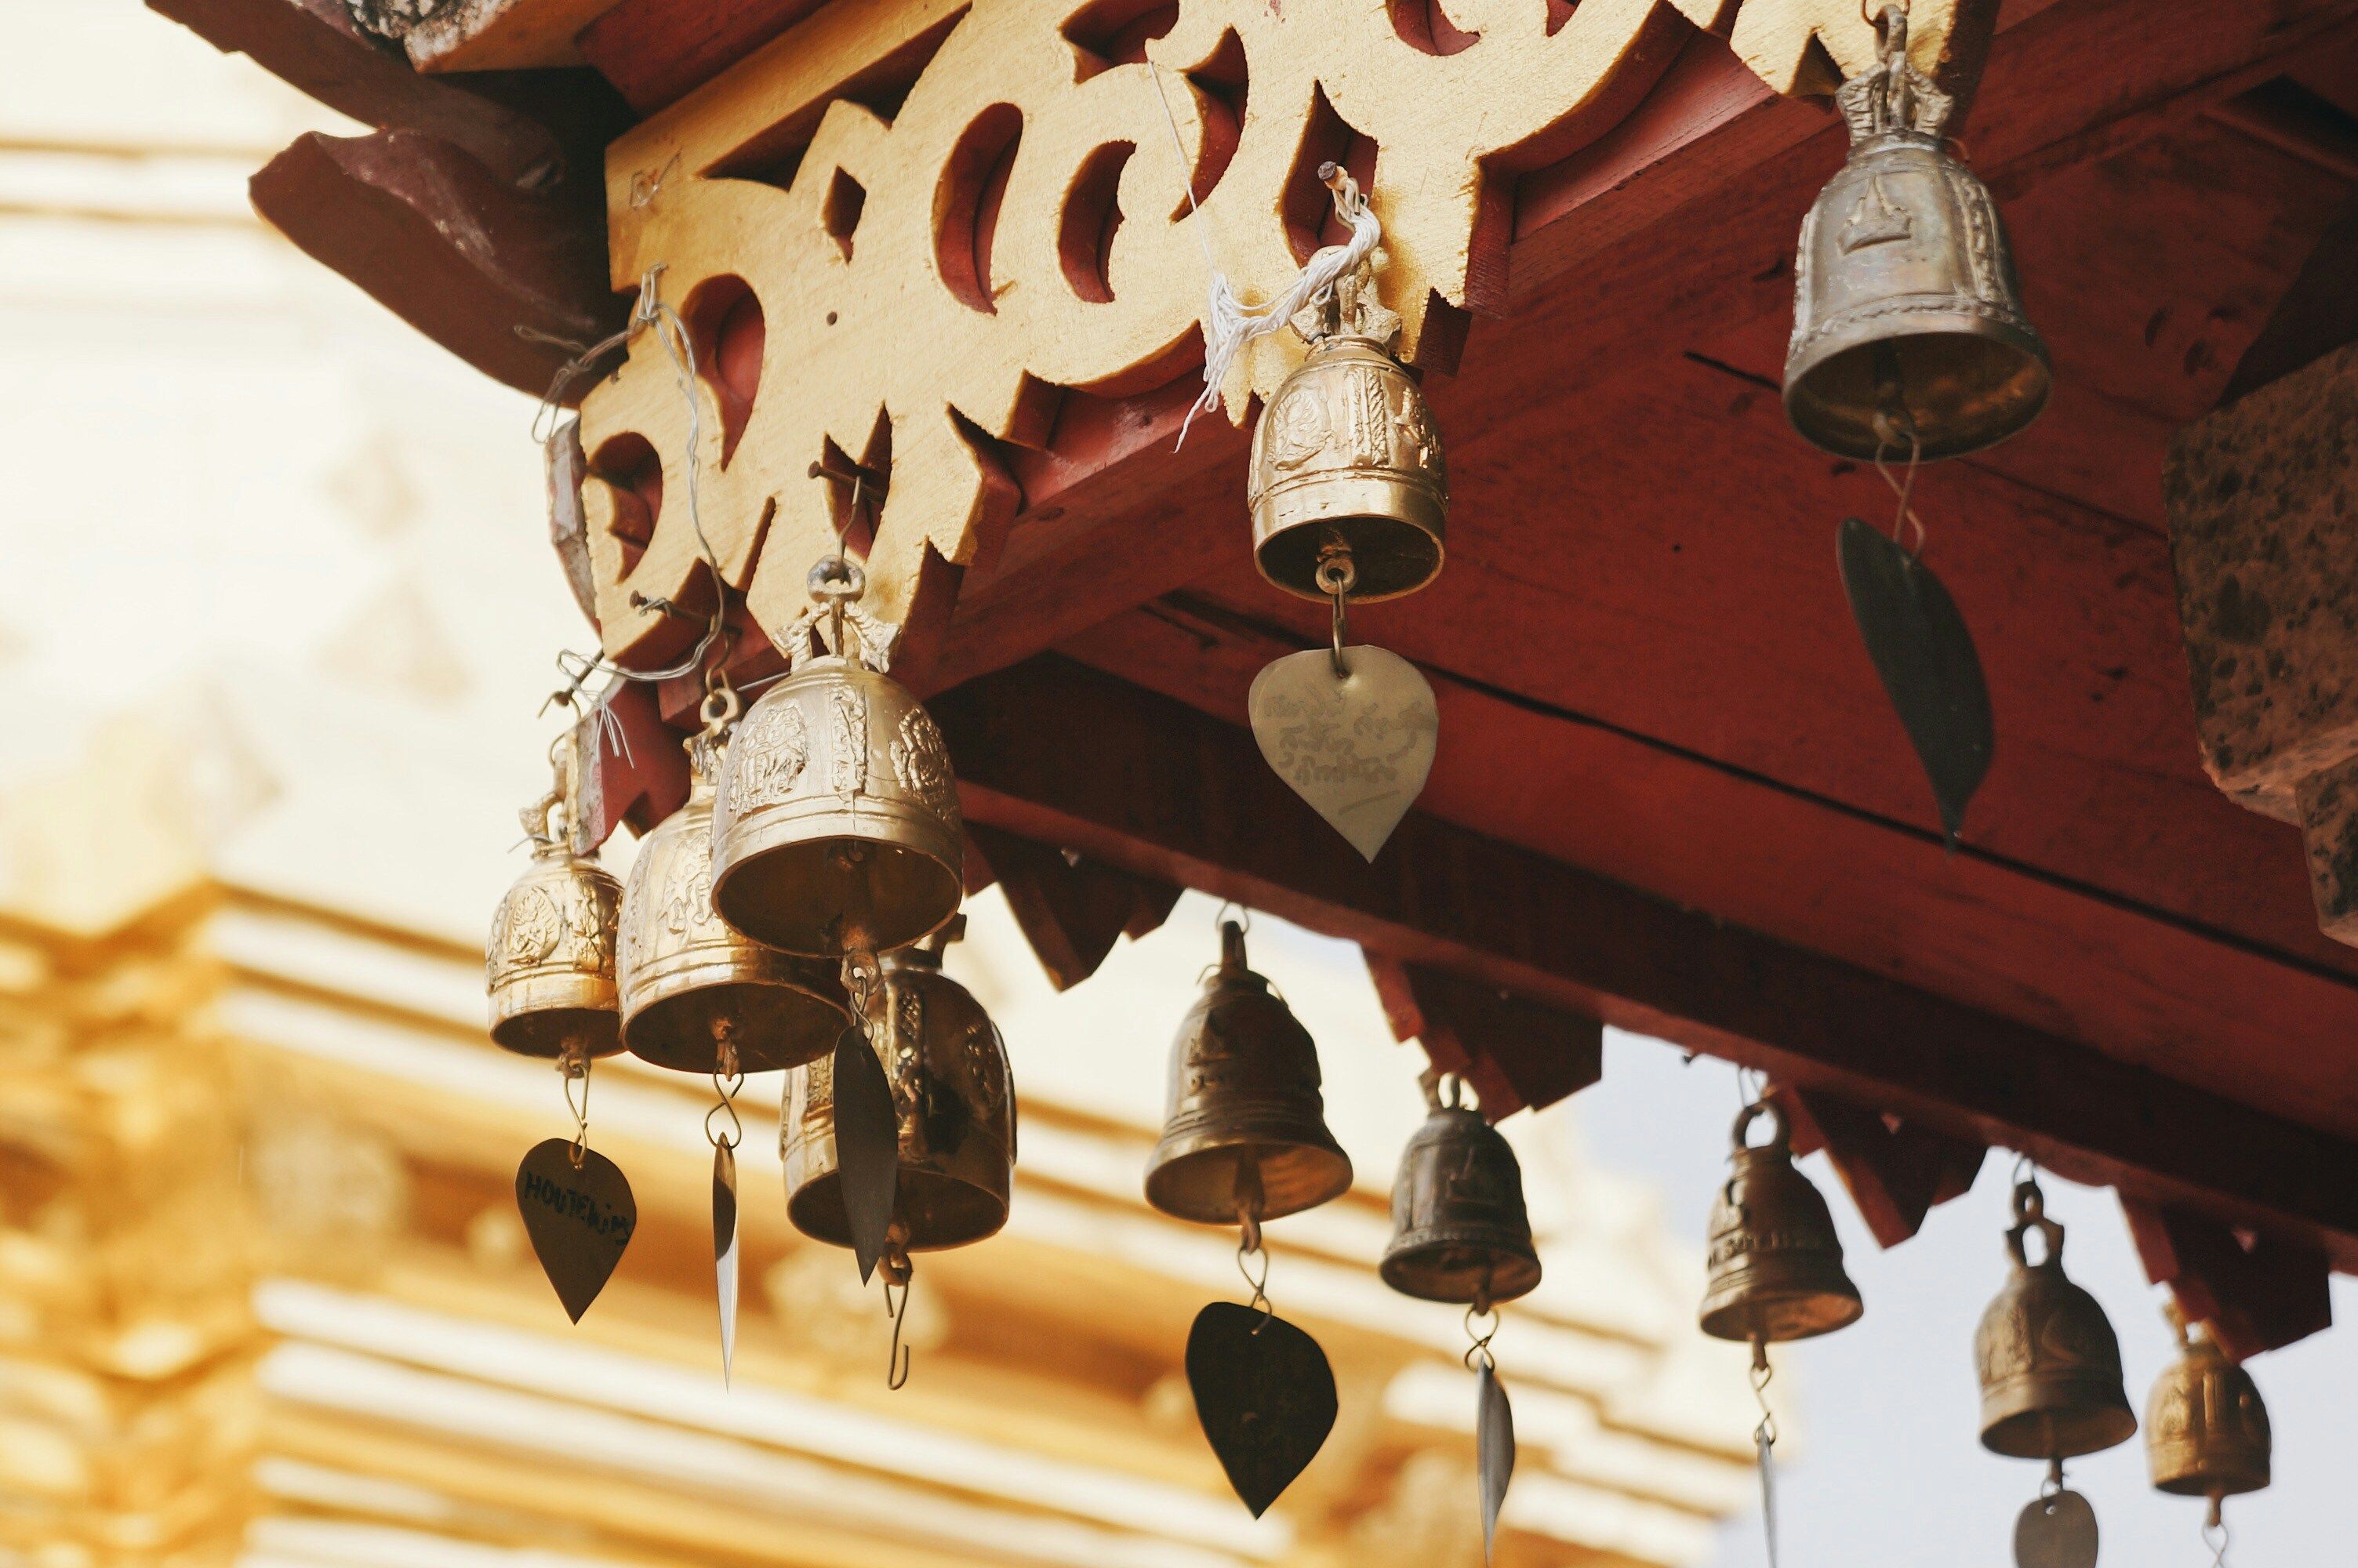 Bells hanging from the eaves of a temple or pagoda.